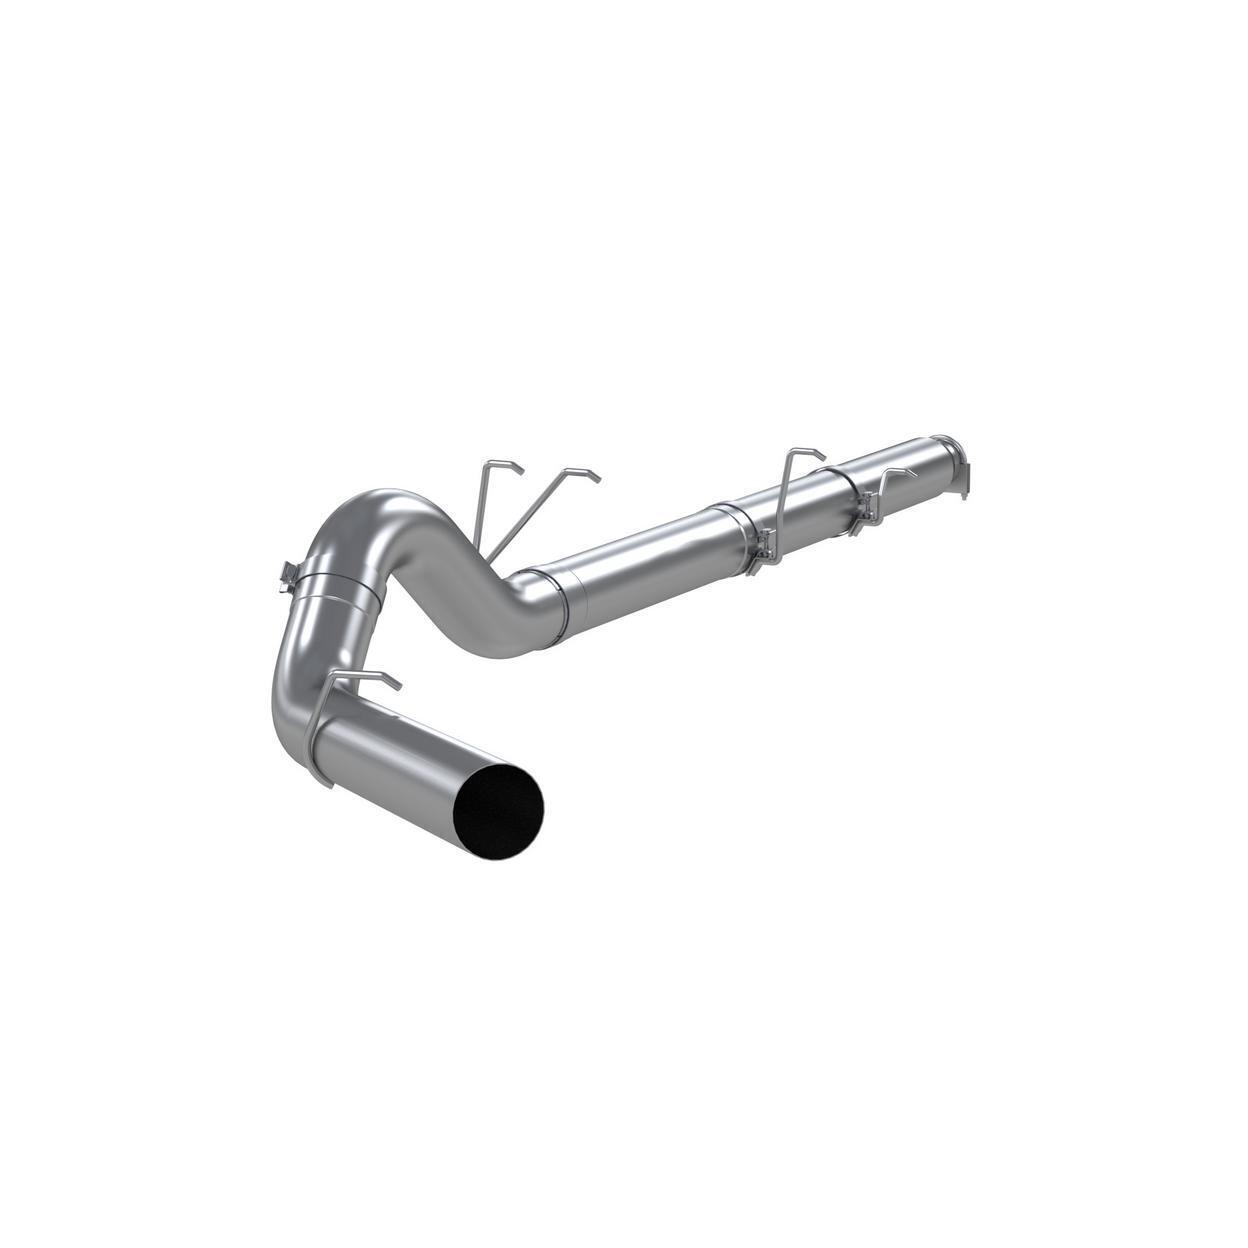 Exhaust System Kit for 2007 Ford F-250 Super Duty